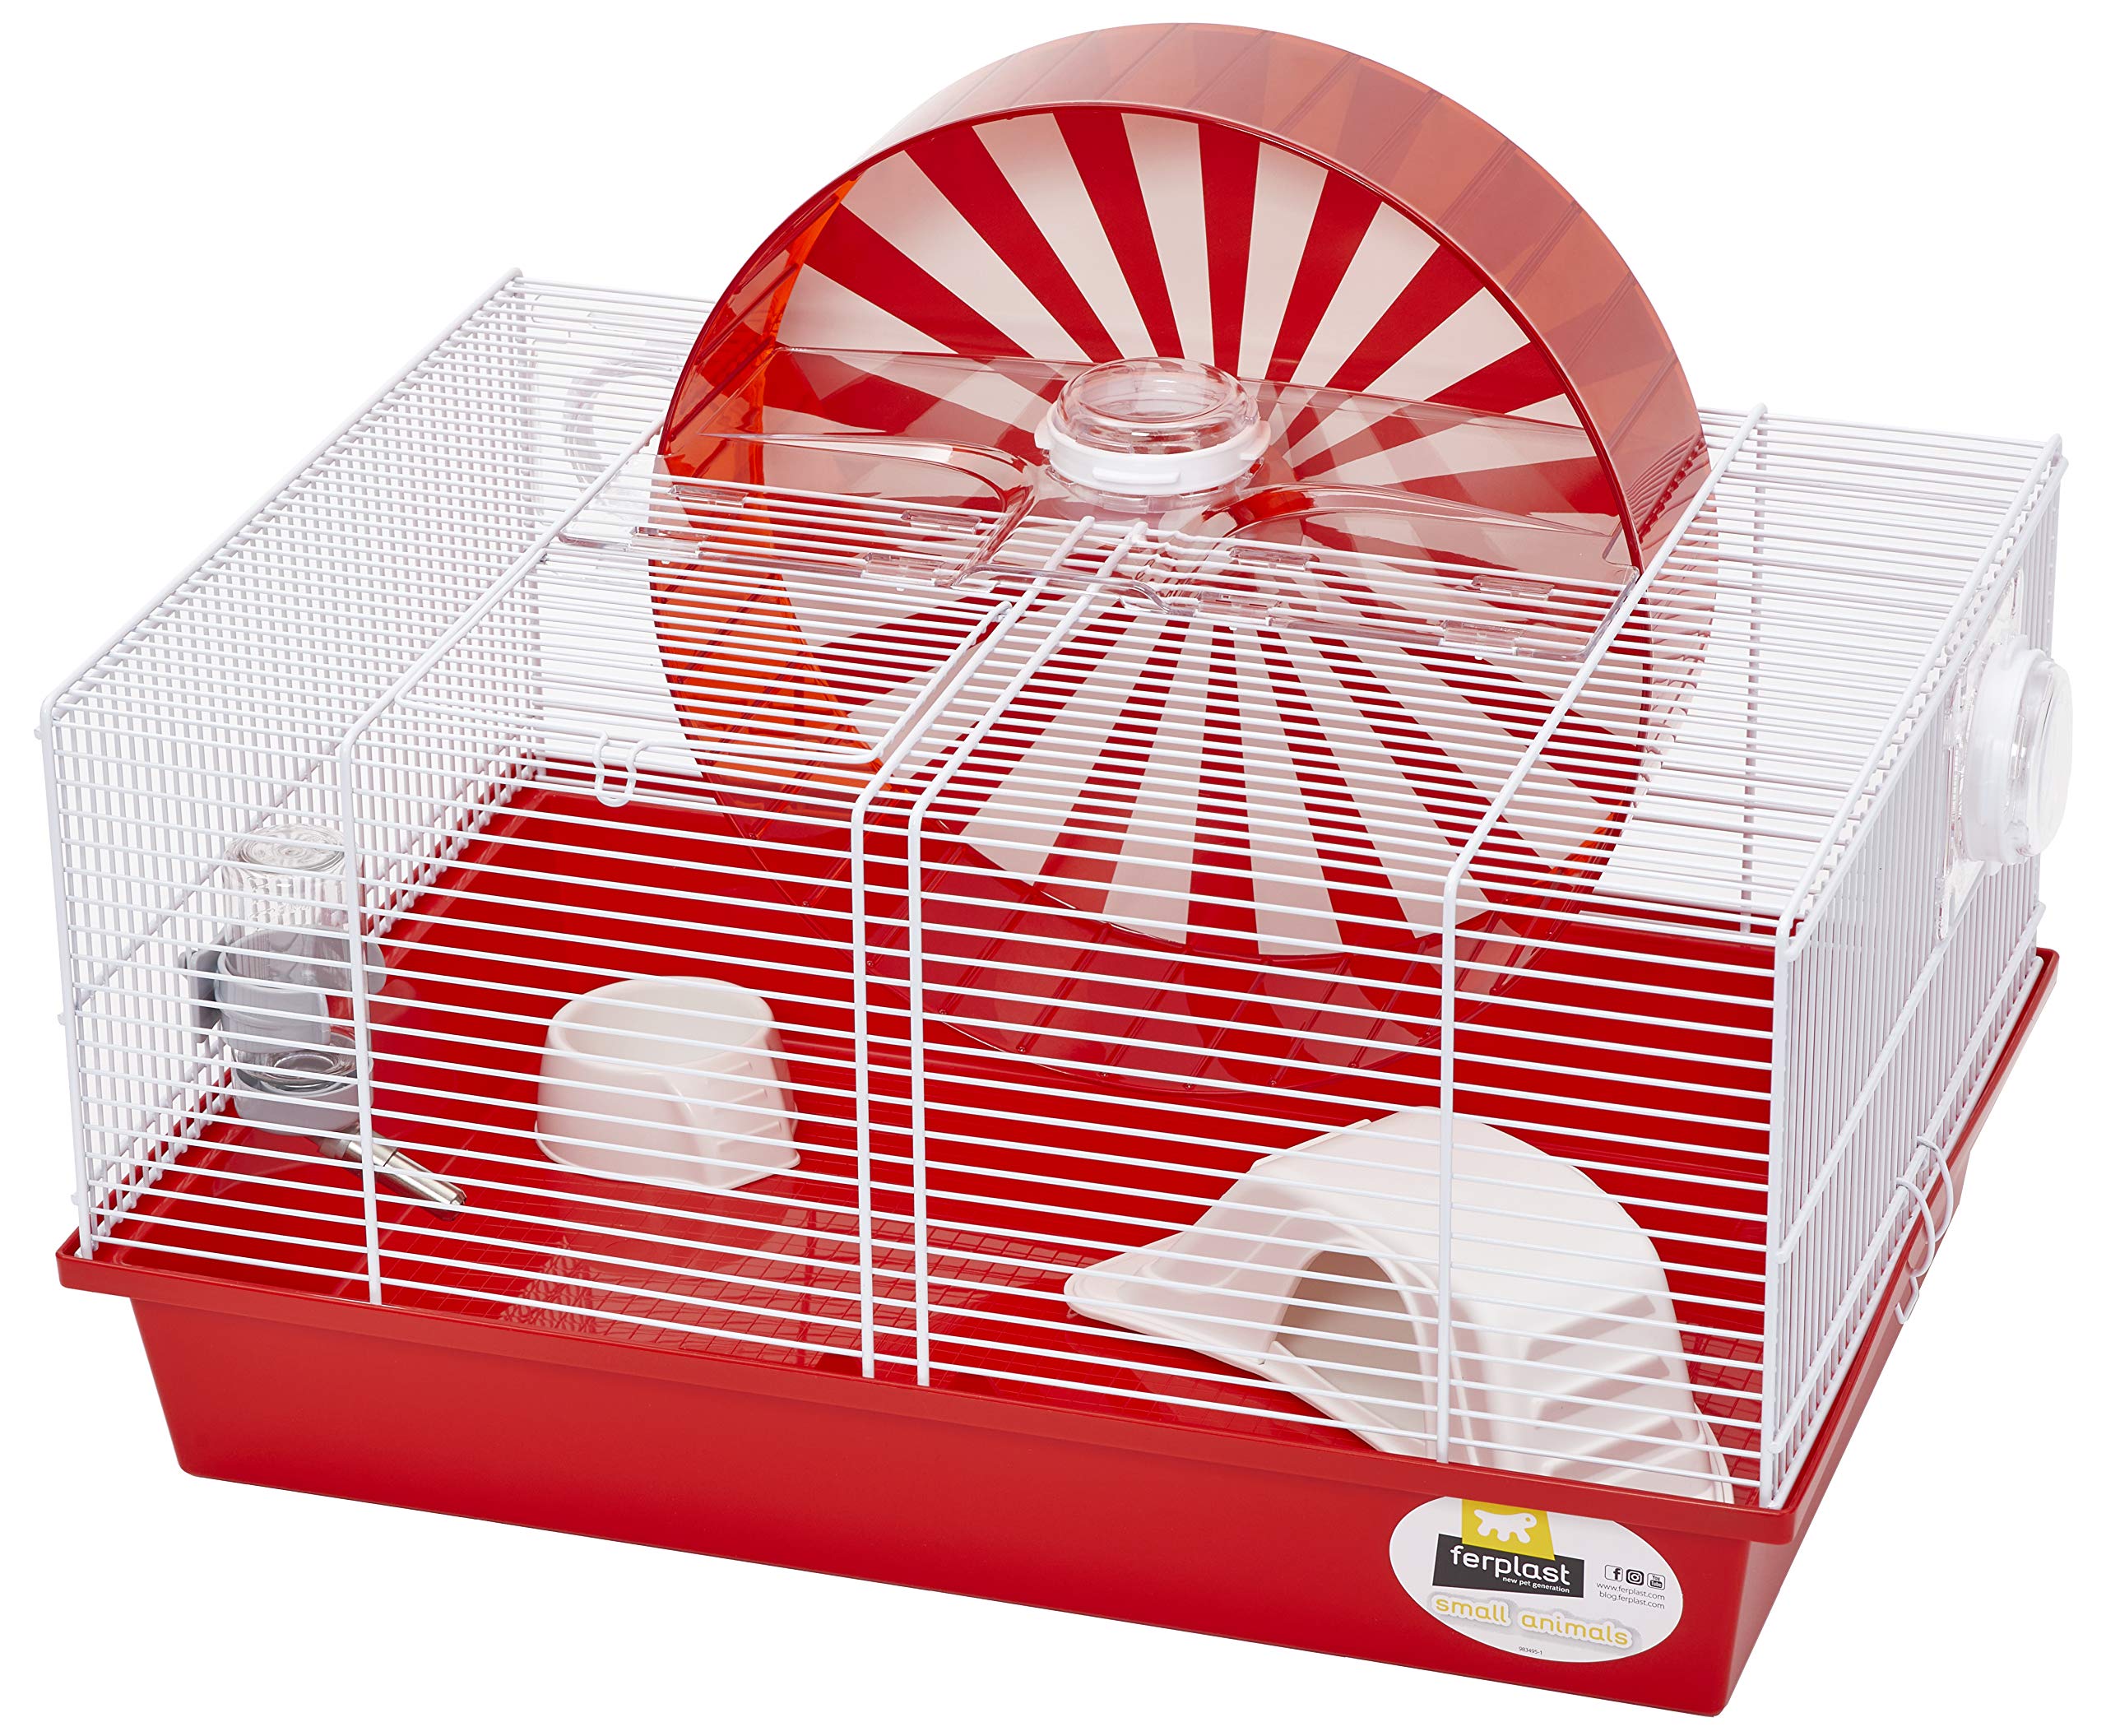 Ferplast Coney Island Hampster Cage includes Accessories - 20